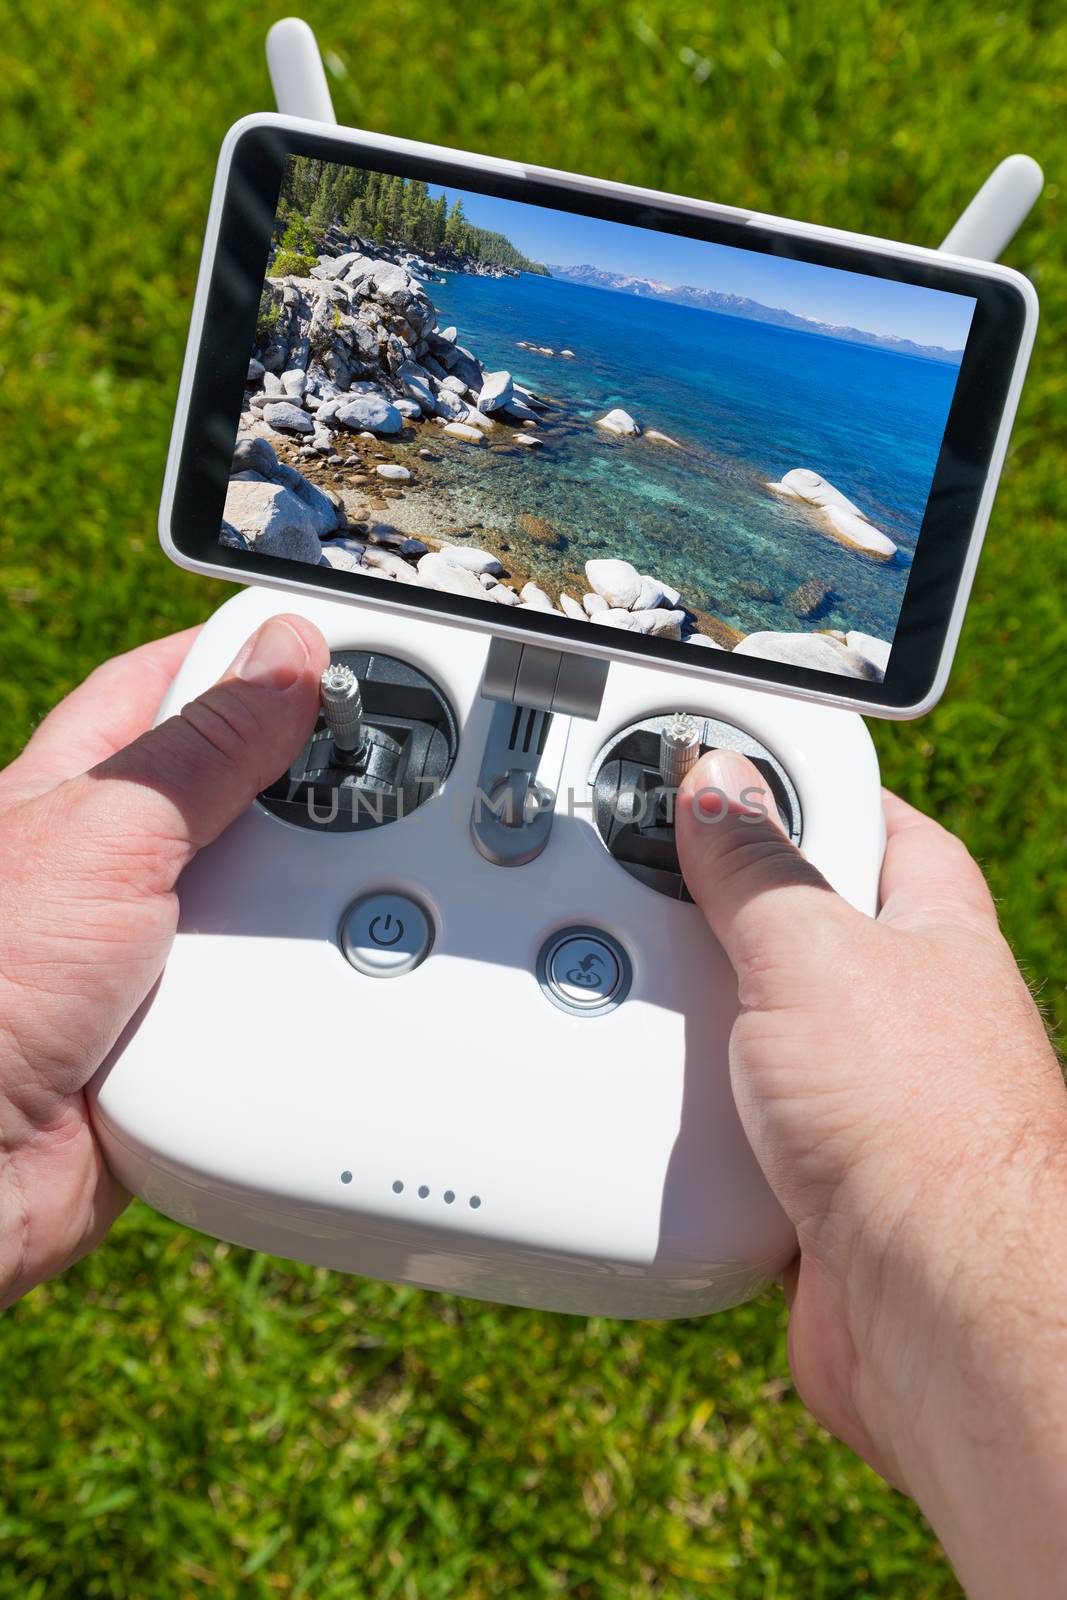 Hands Holding Drone Quadcopter Controller With Beautiful Lake View on Screen. by Feverpitched